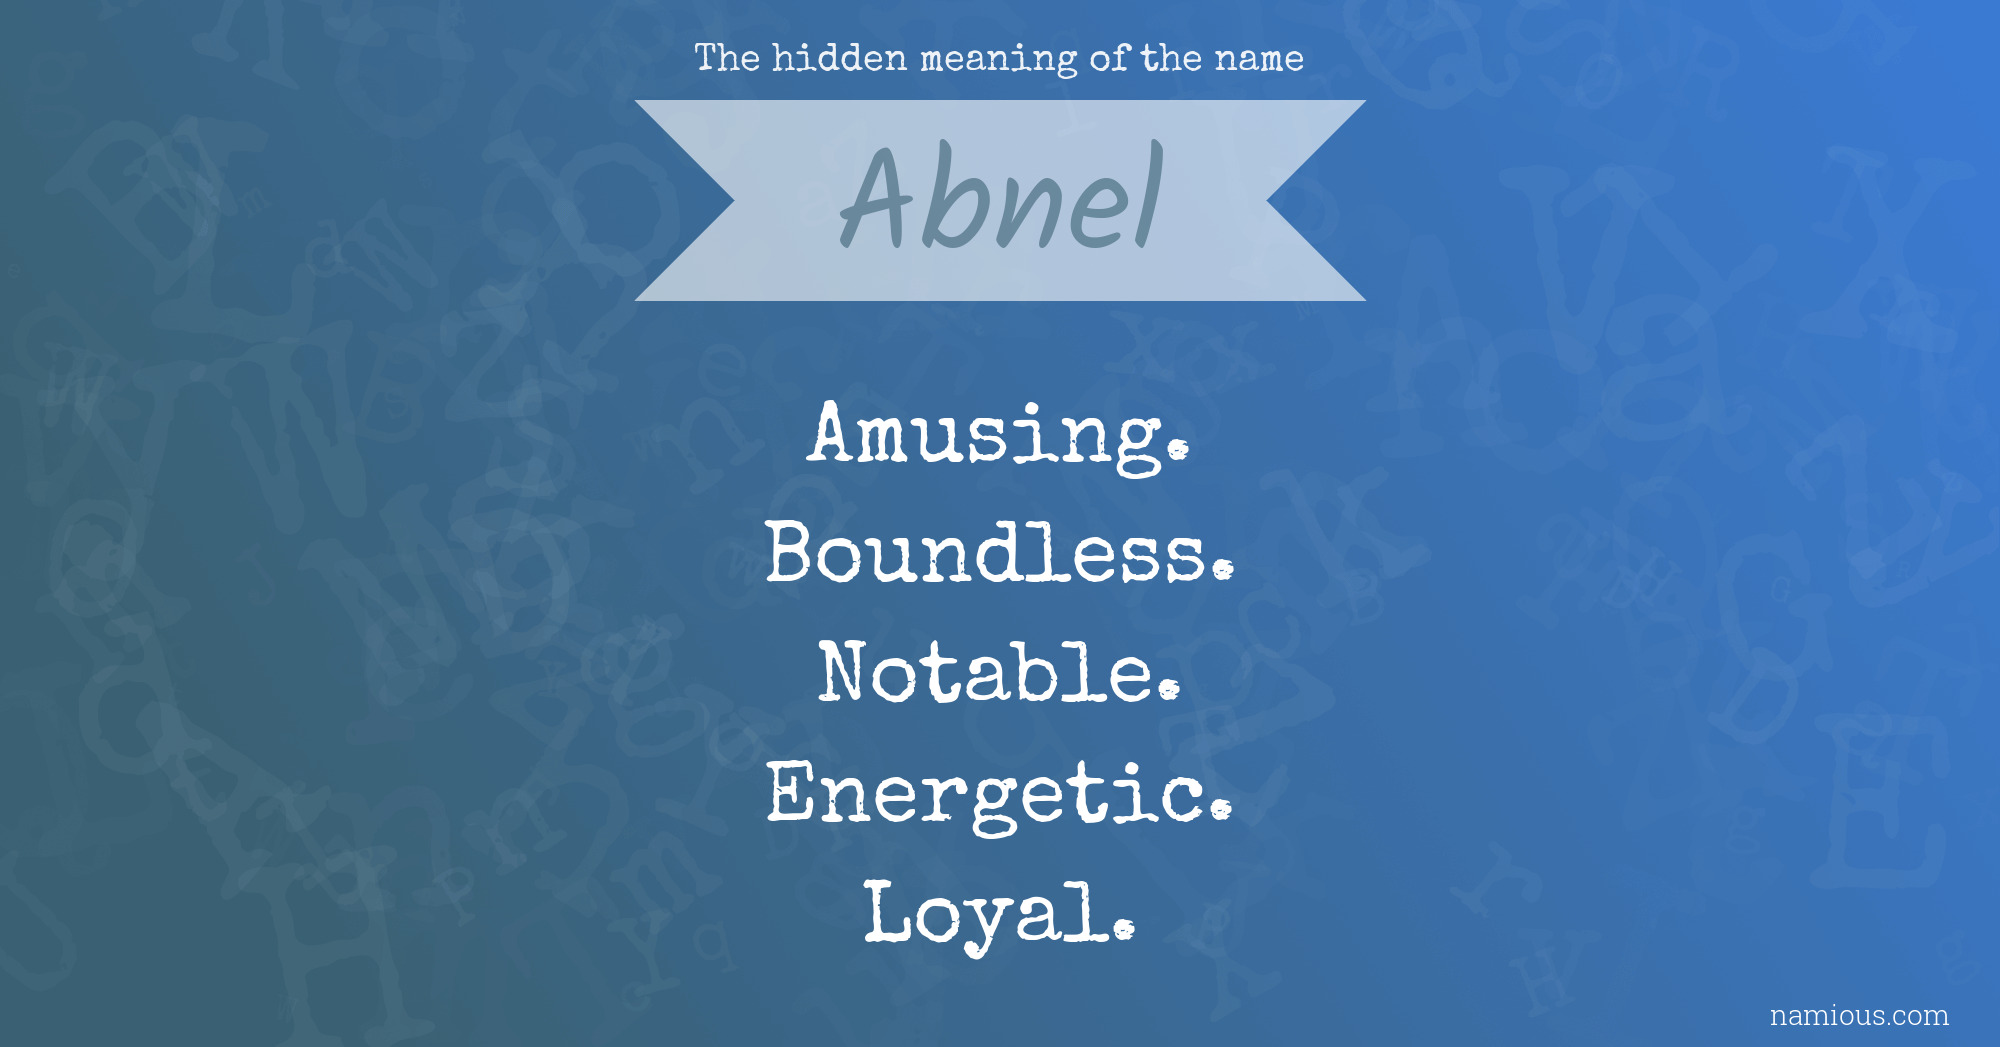 The hidden meaning of the name Abnel